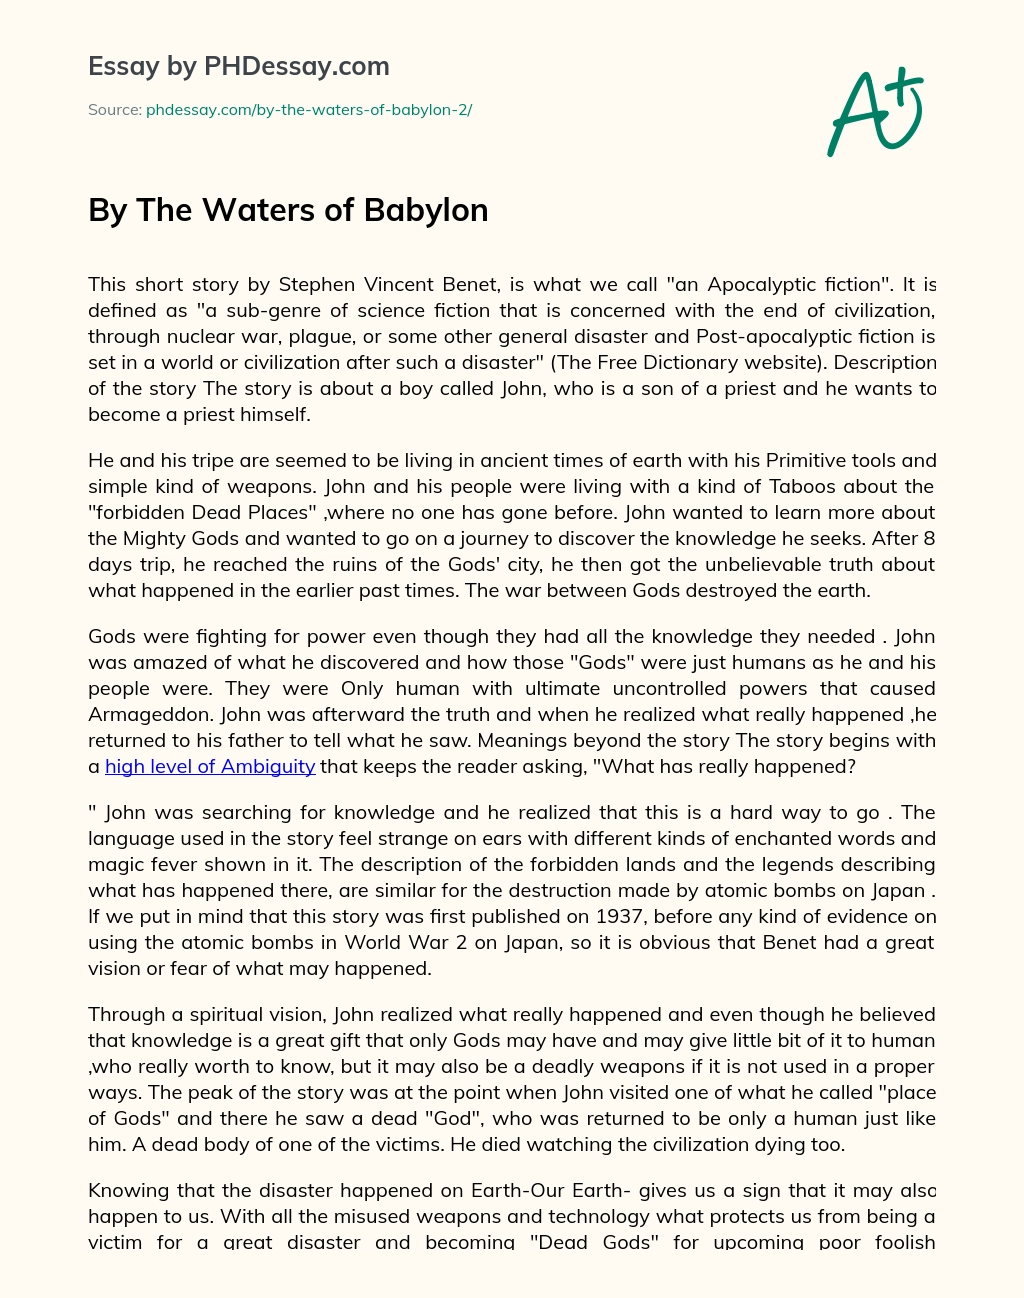 by-the-waters-of-babylon-summary-and-analysis-essay-phdessay